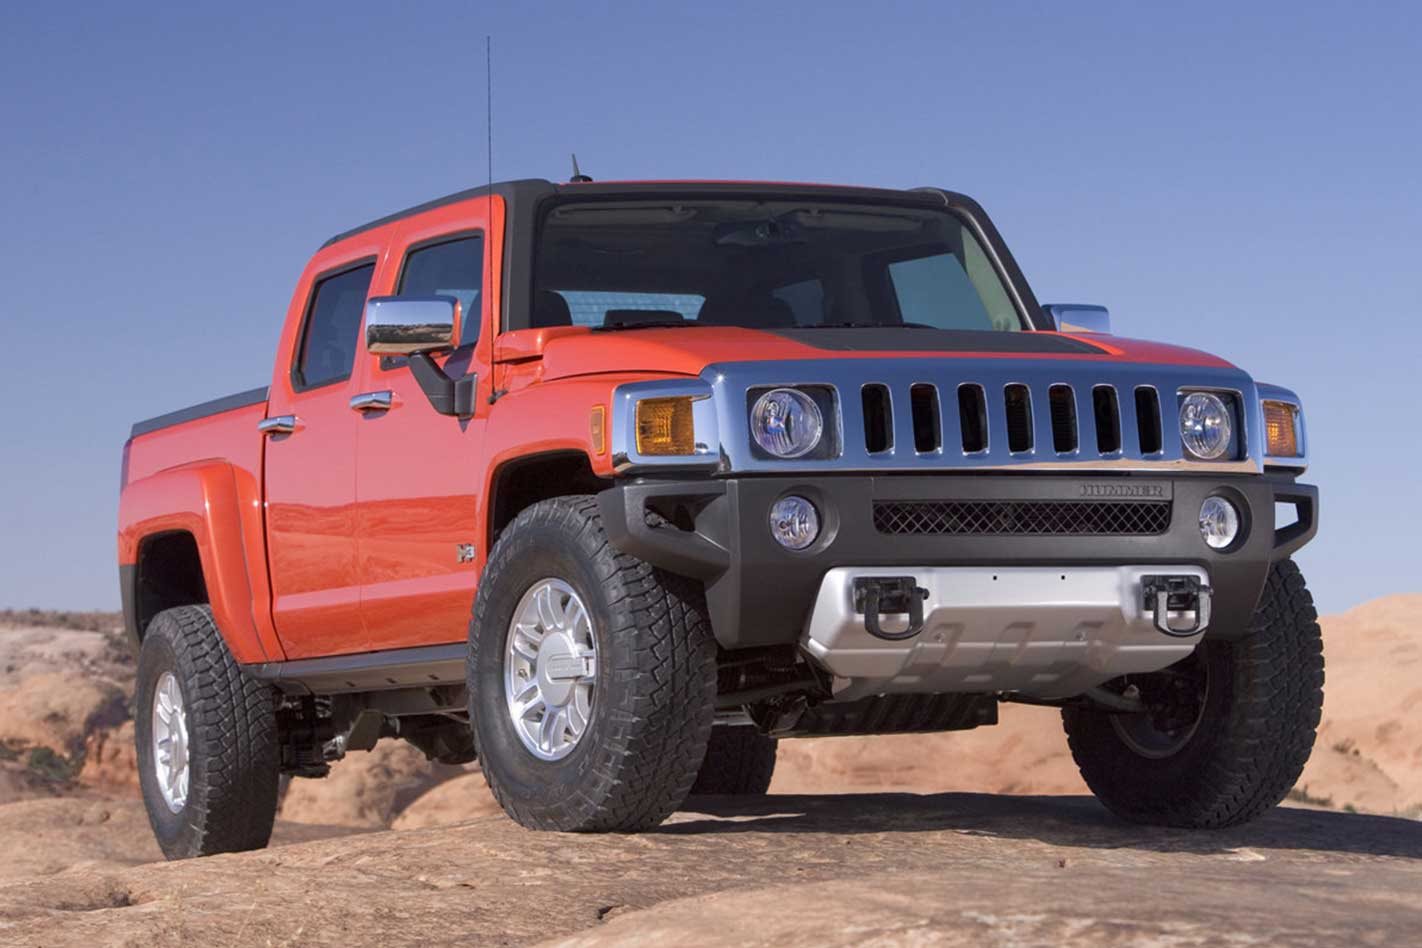 GM contemplates an all-electric Hummer1422 x 948